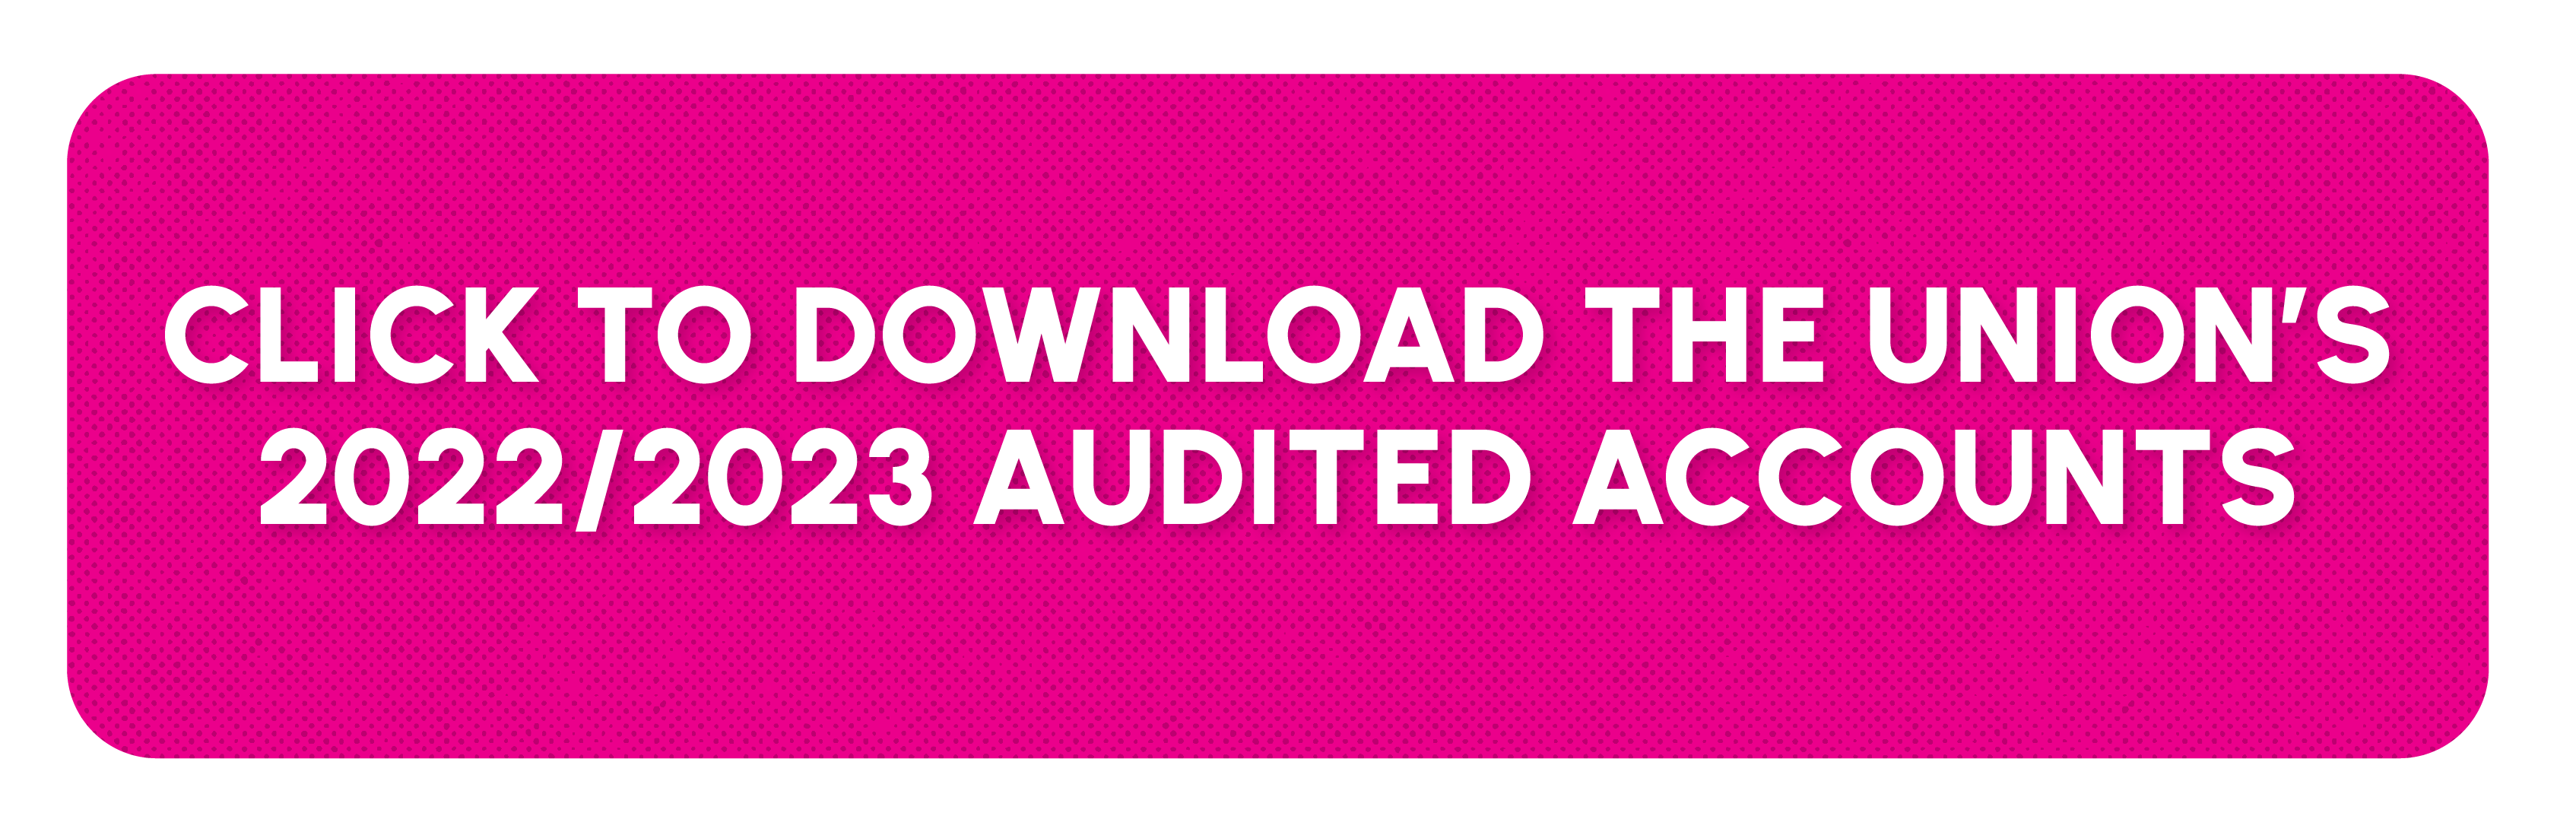 Click here to download the Union's 2022/2023 audited accounts